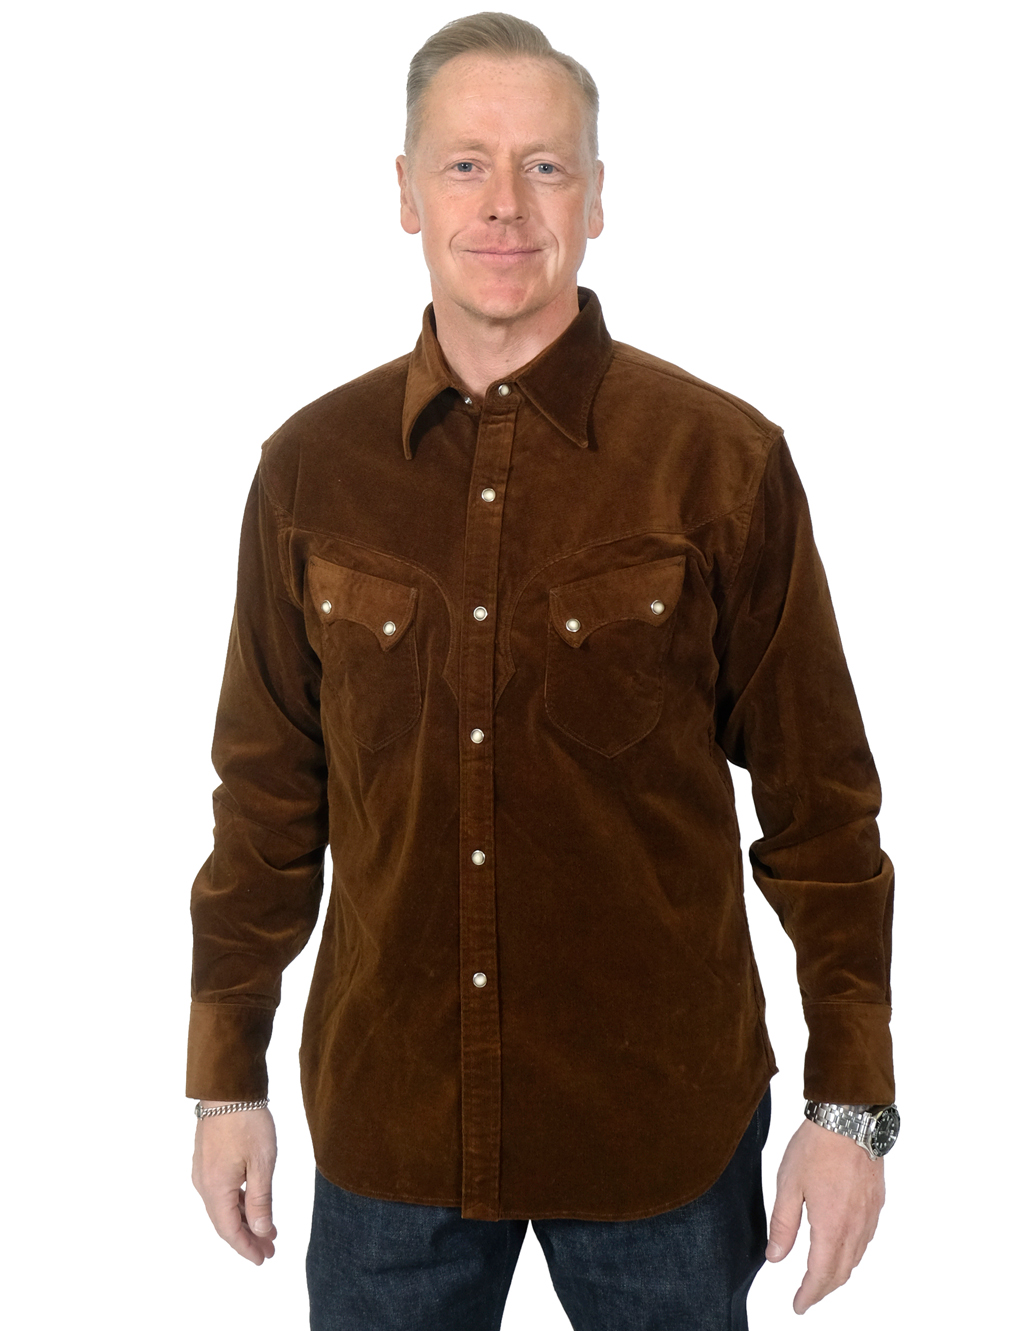 Stevenson-Overall-Co.---Cody-Shirt-21-Wale-Organic-Stretched-Corduroy---Brown--1